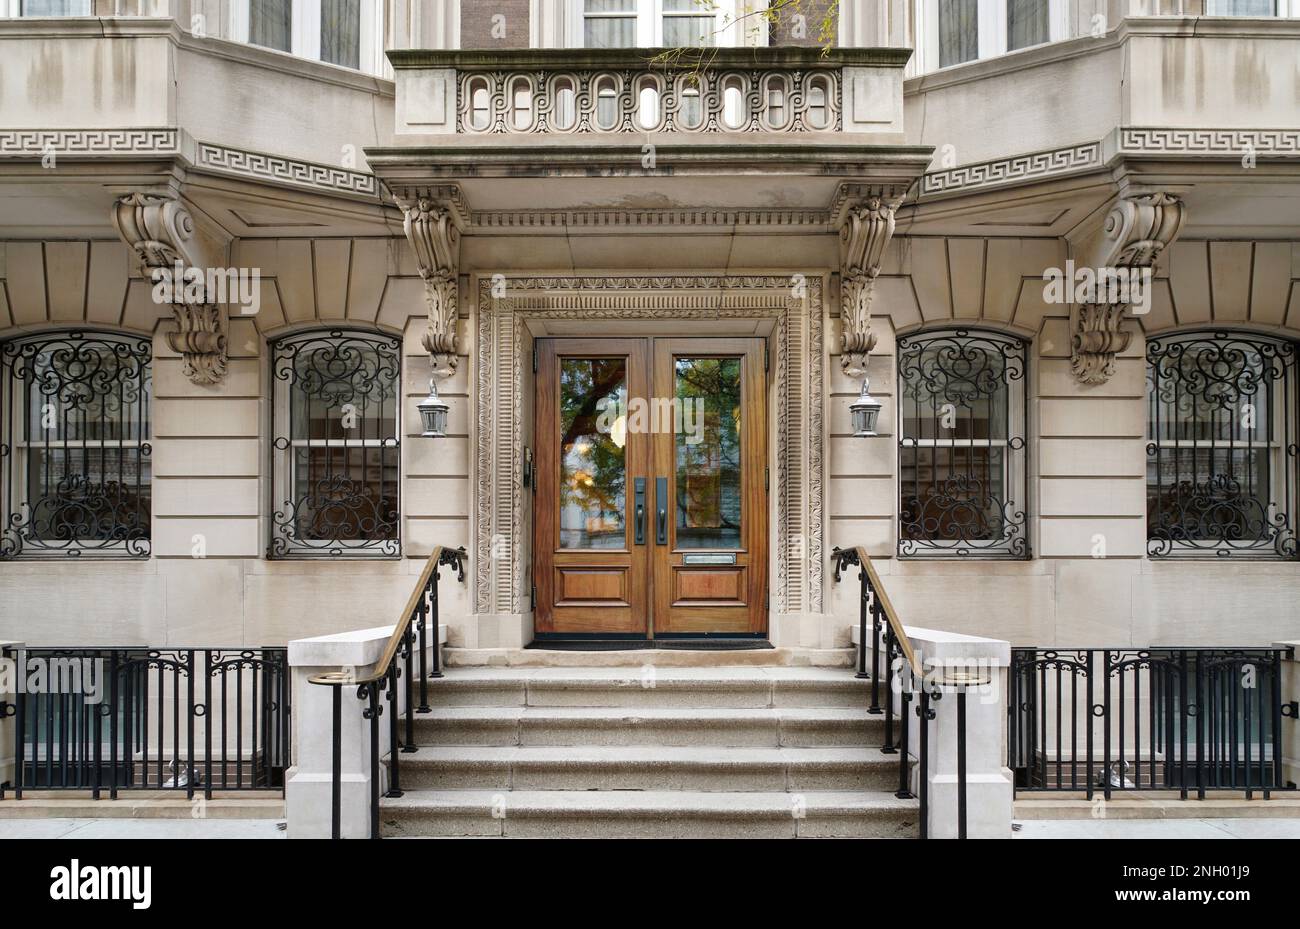 Entrance to elegant New York apartment building with stone detailing Stock Photo